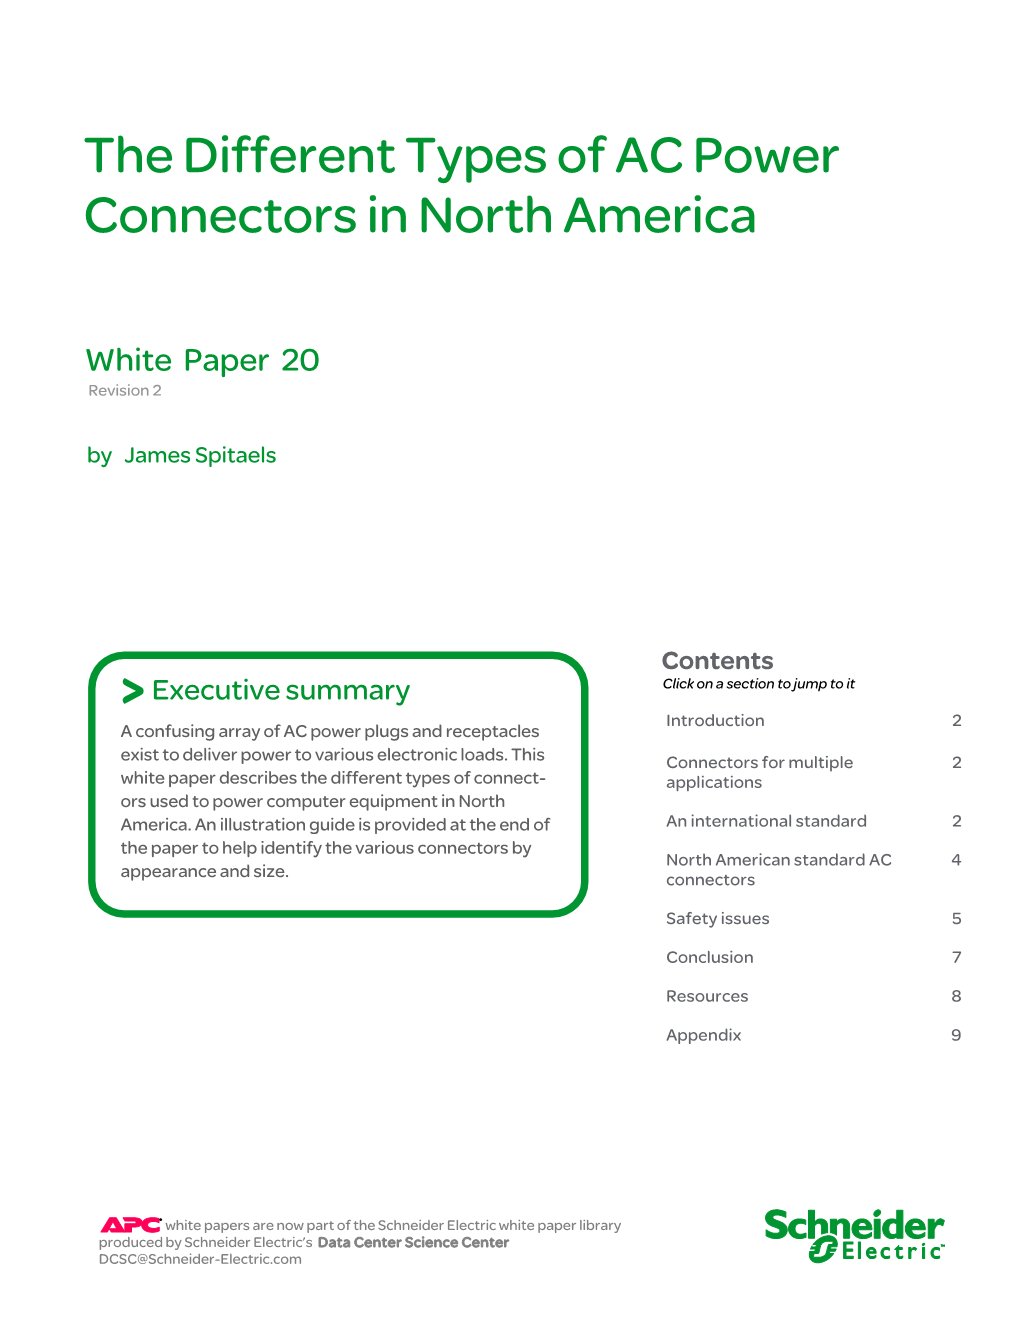 The Different Types of AC Power Connectors in North America